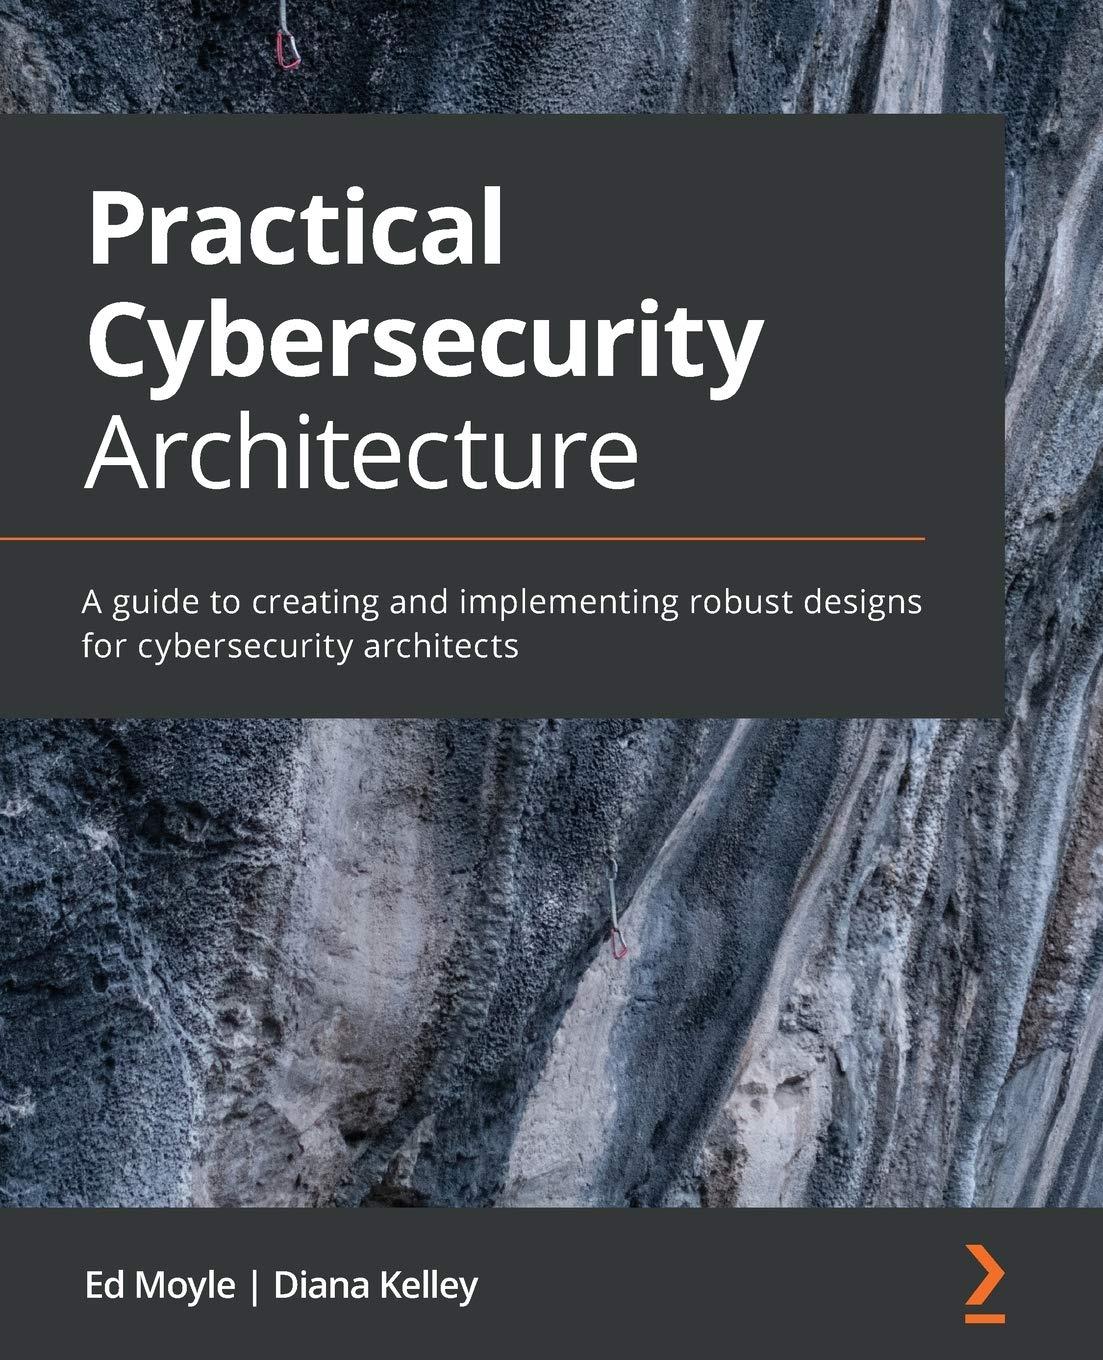 practical cybersecurity architecture: a guide to creating and implementing robust designs for cybersecurity